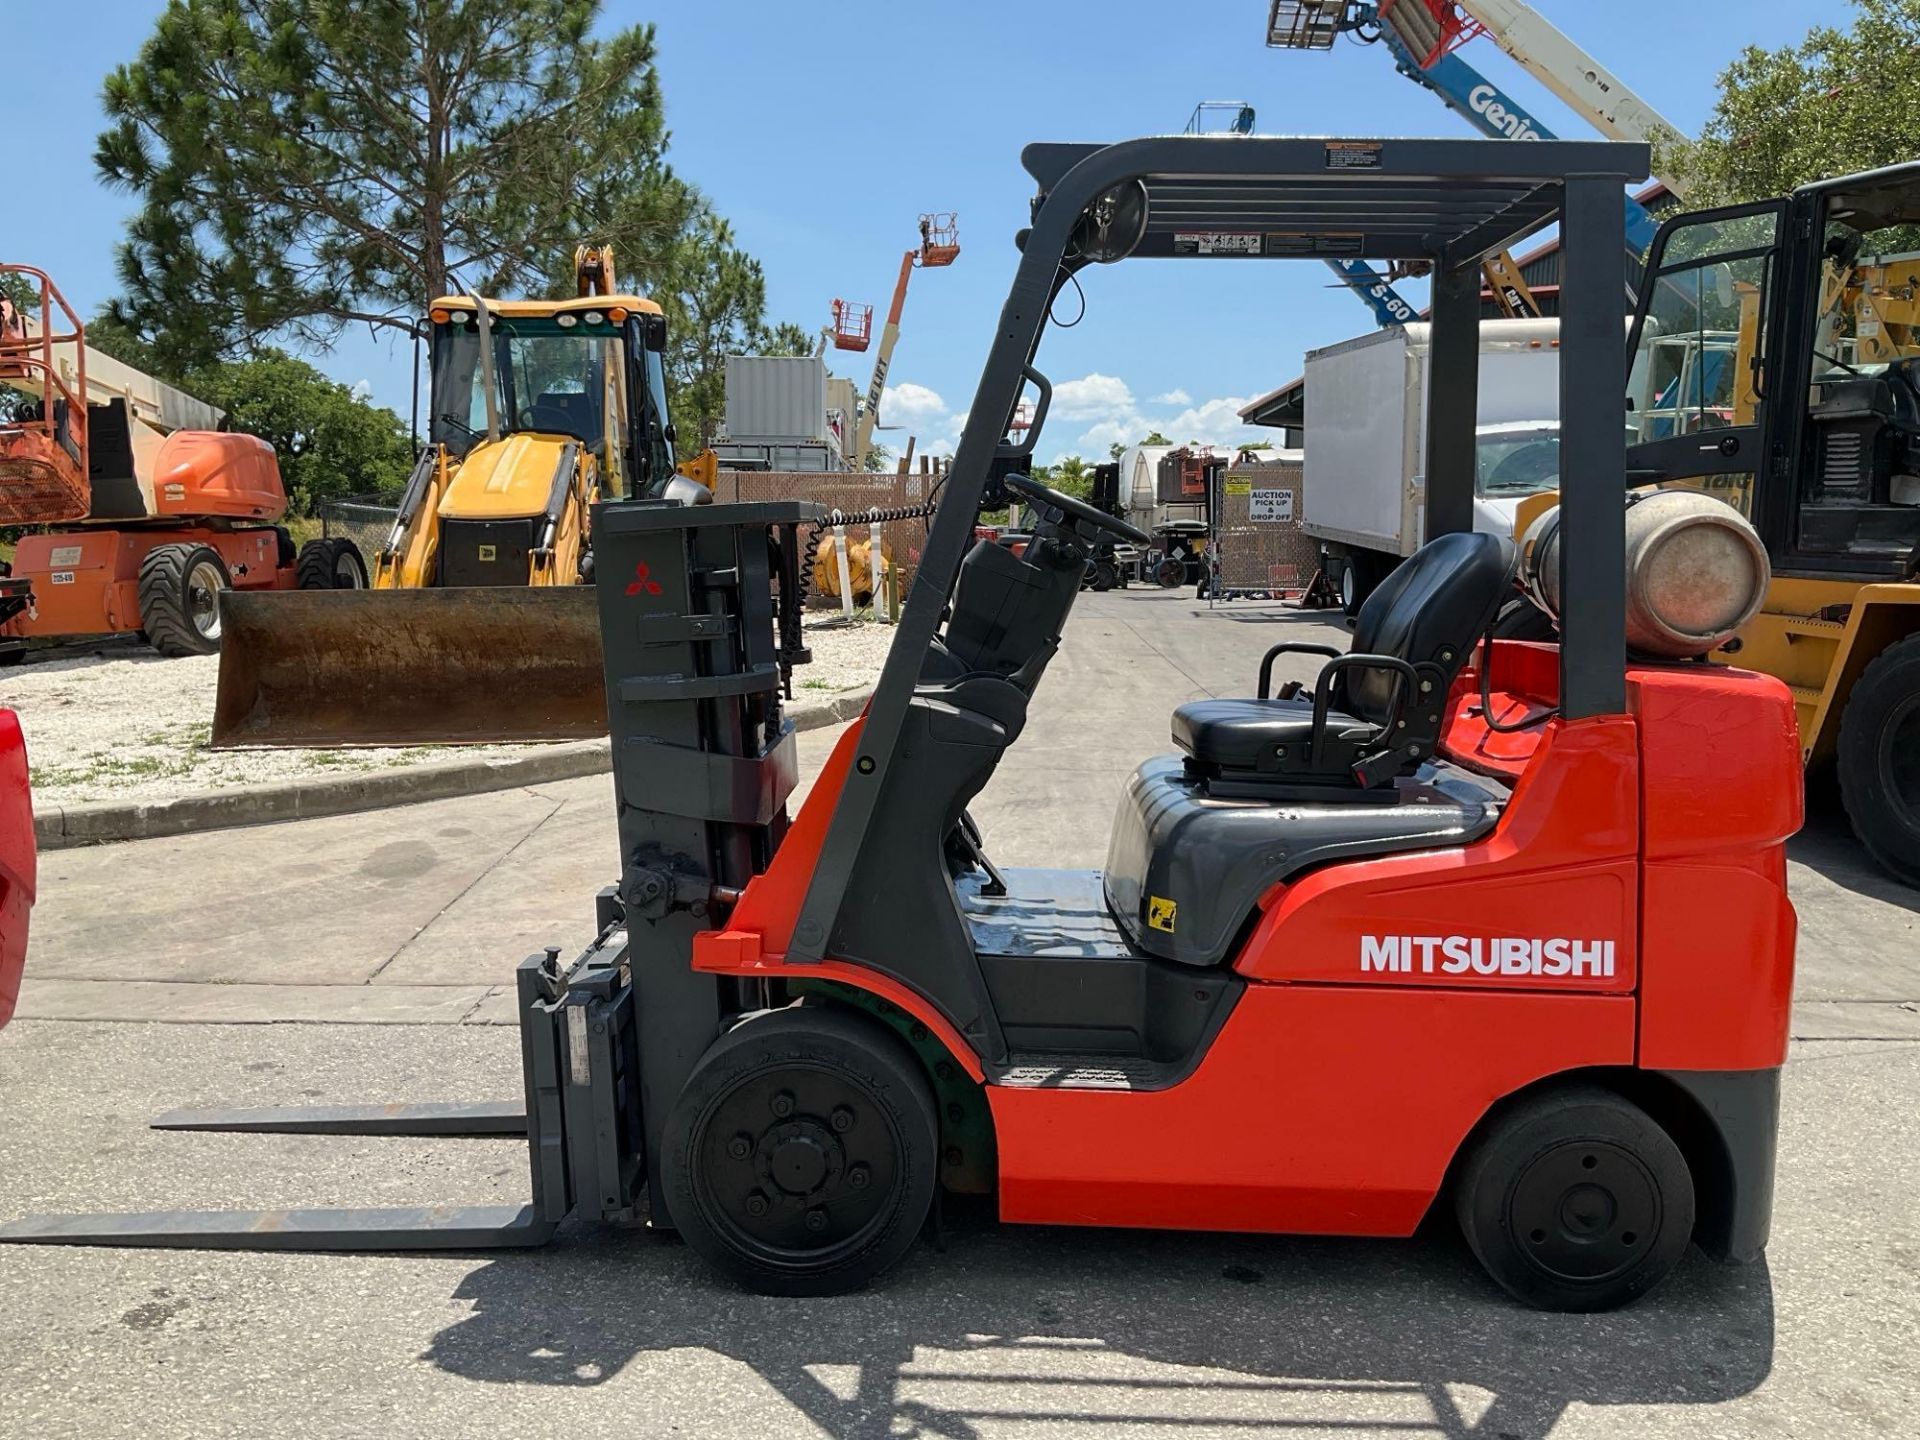 MITSUBISHI FORKLIFT MODEL FGC25N-LP, LP POWERED, APPROX MAX CAPACITY 5000LBS - Image 3 of 14